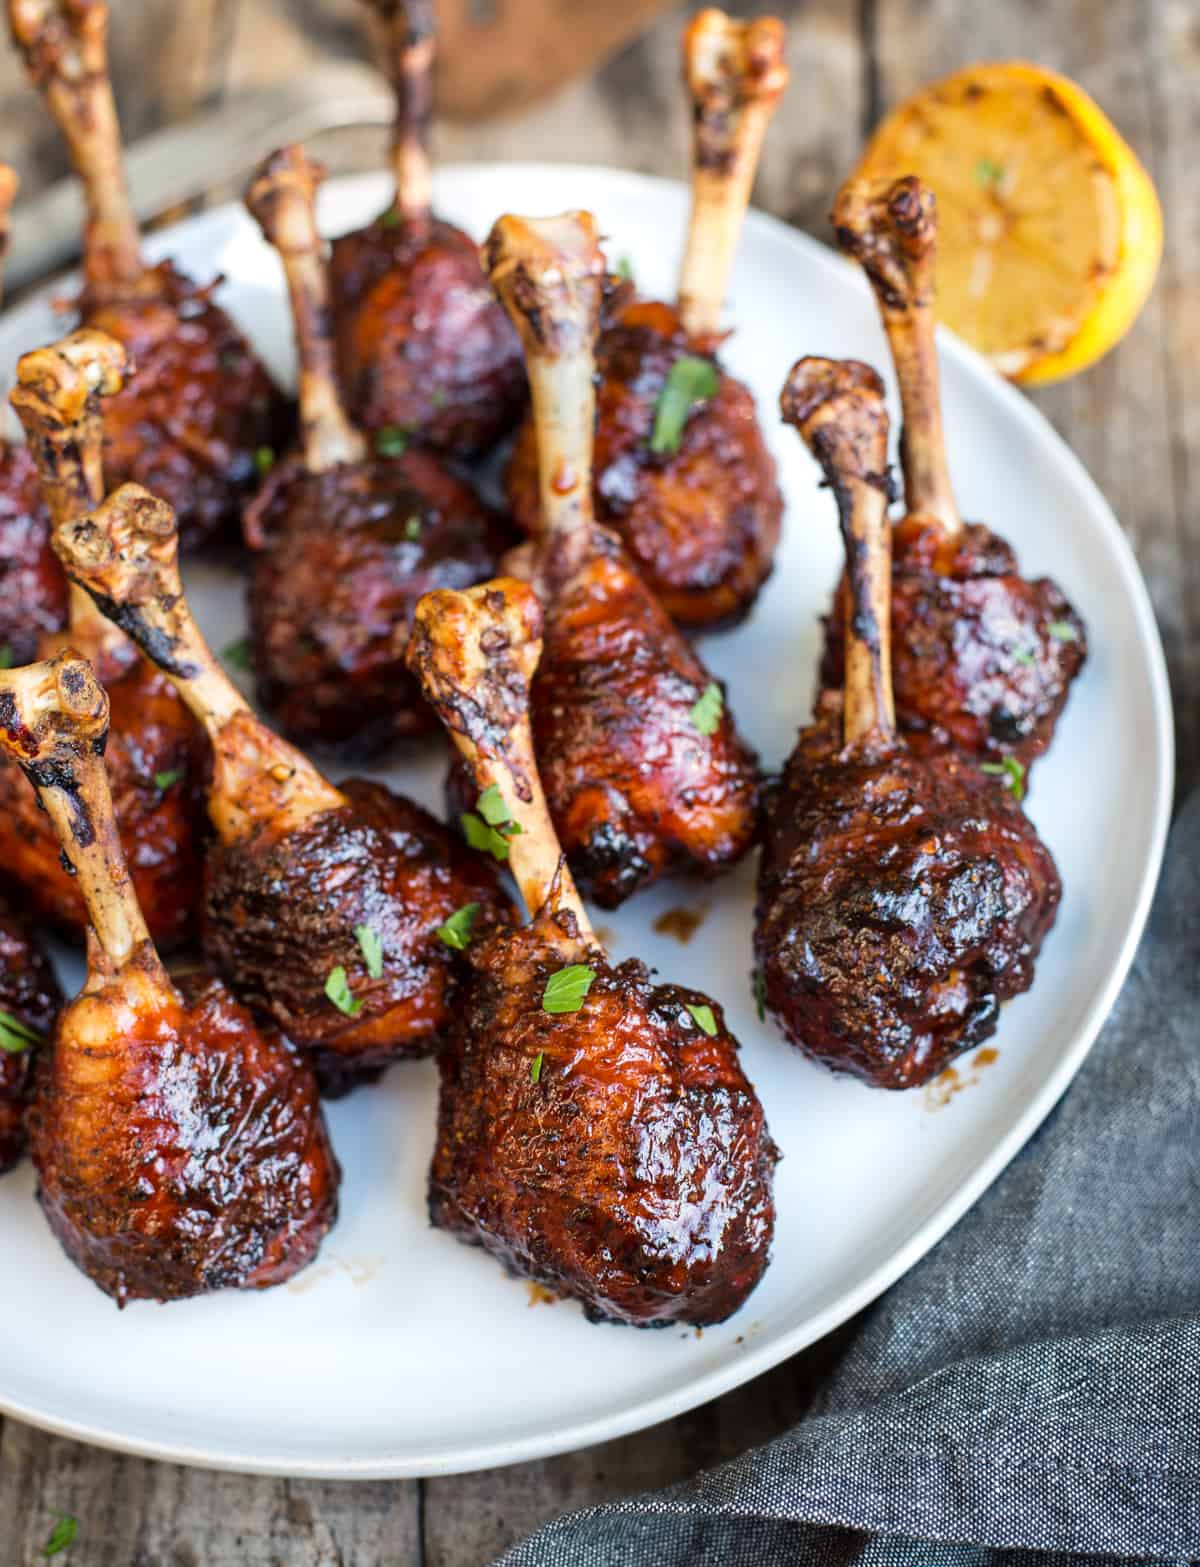 grilled chicken lollipops with sauce glaze on a plate.